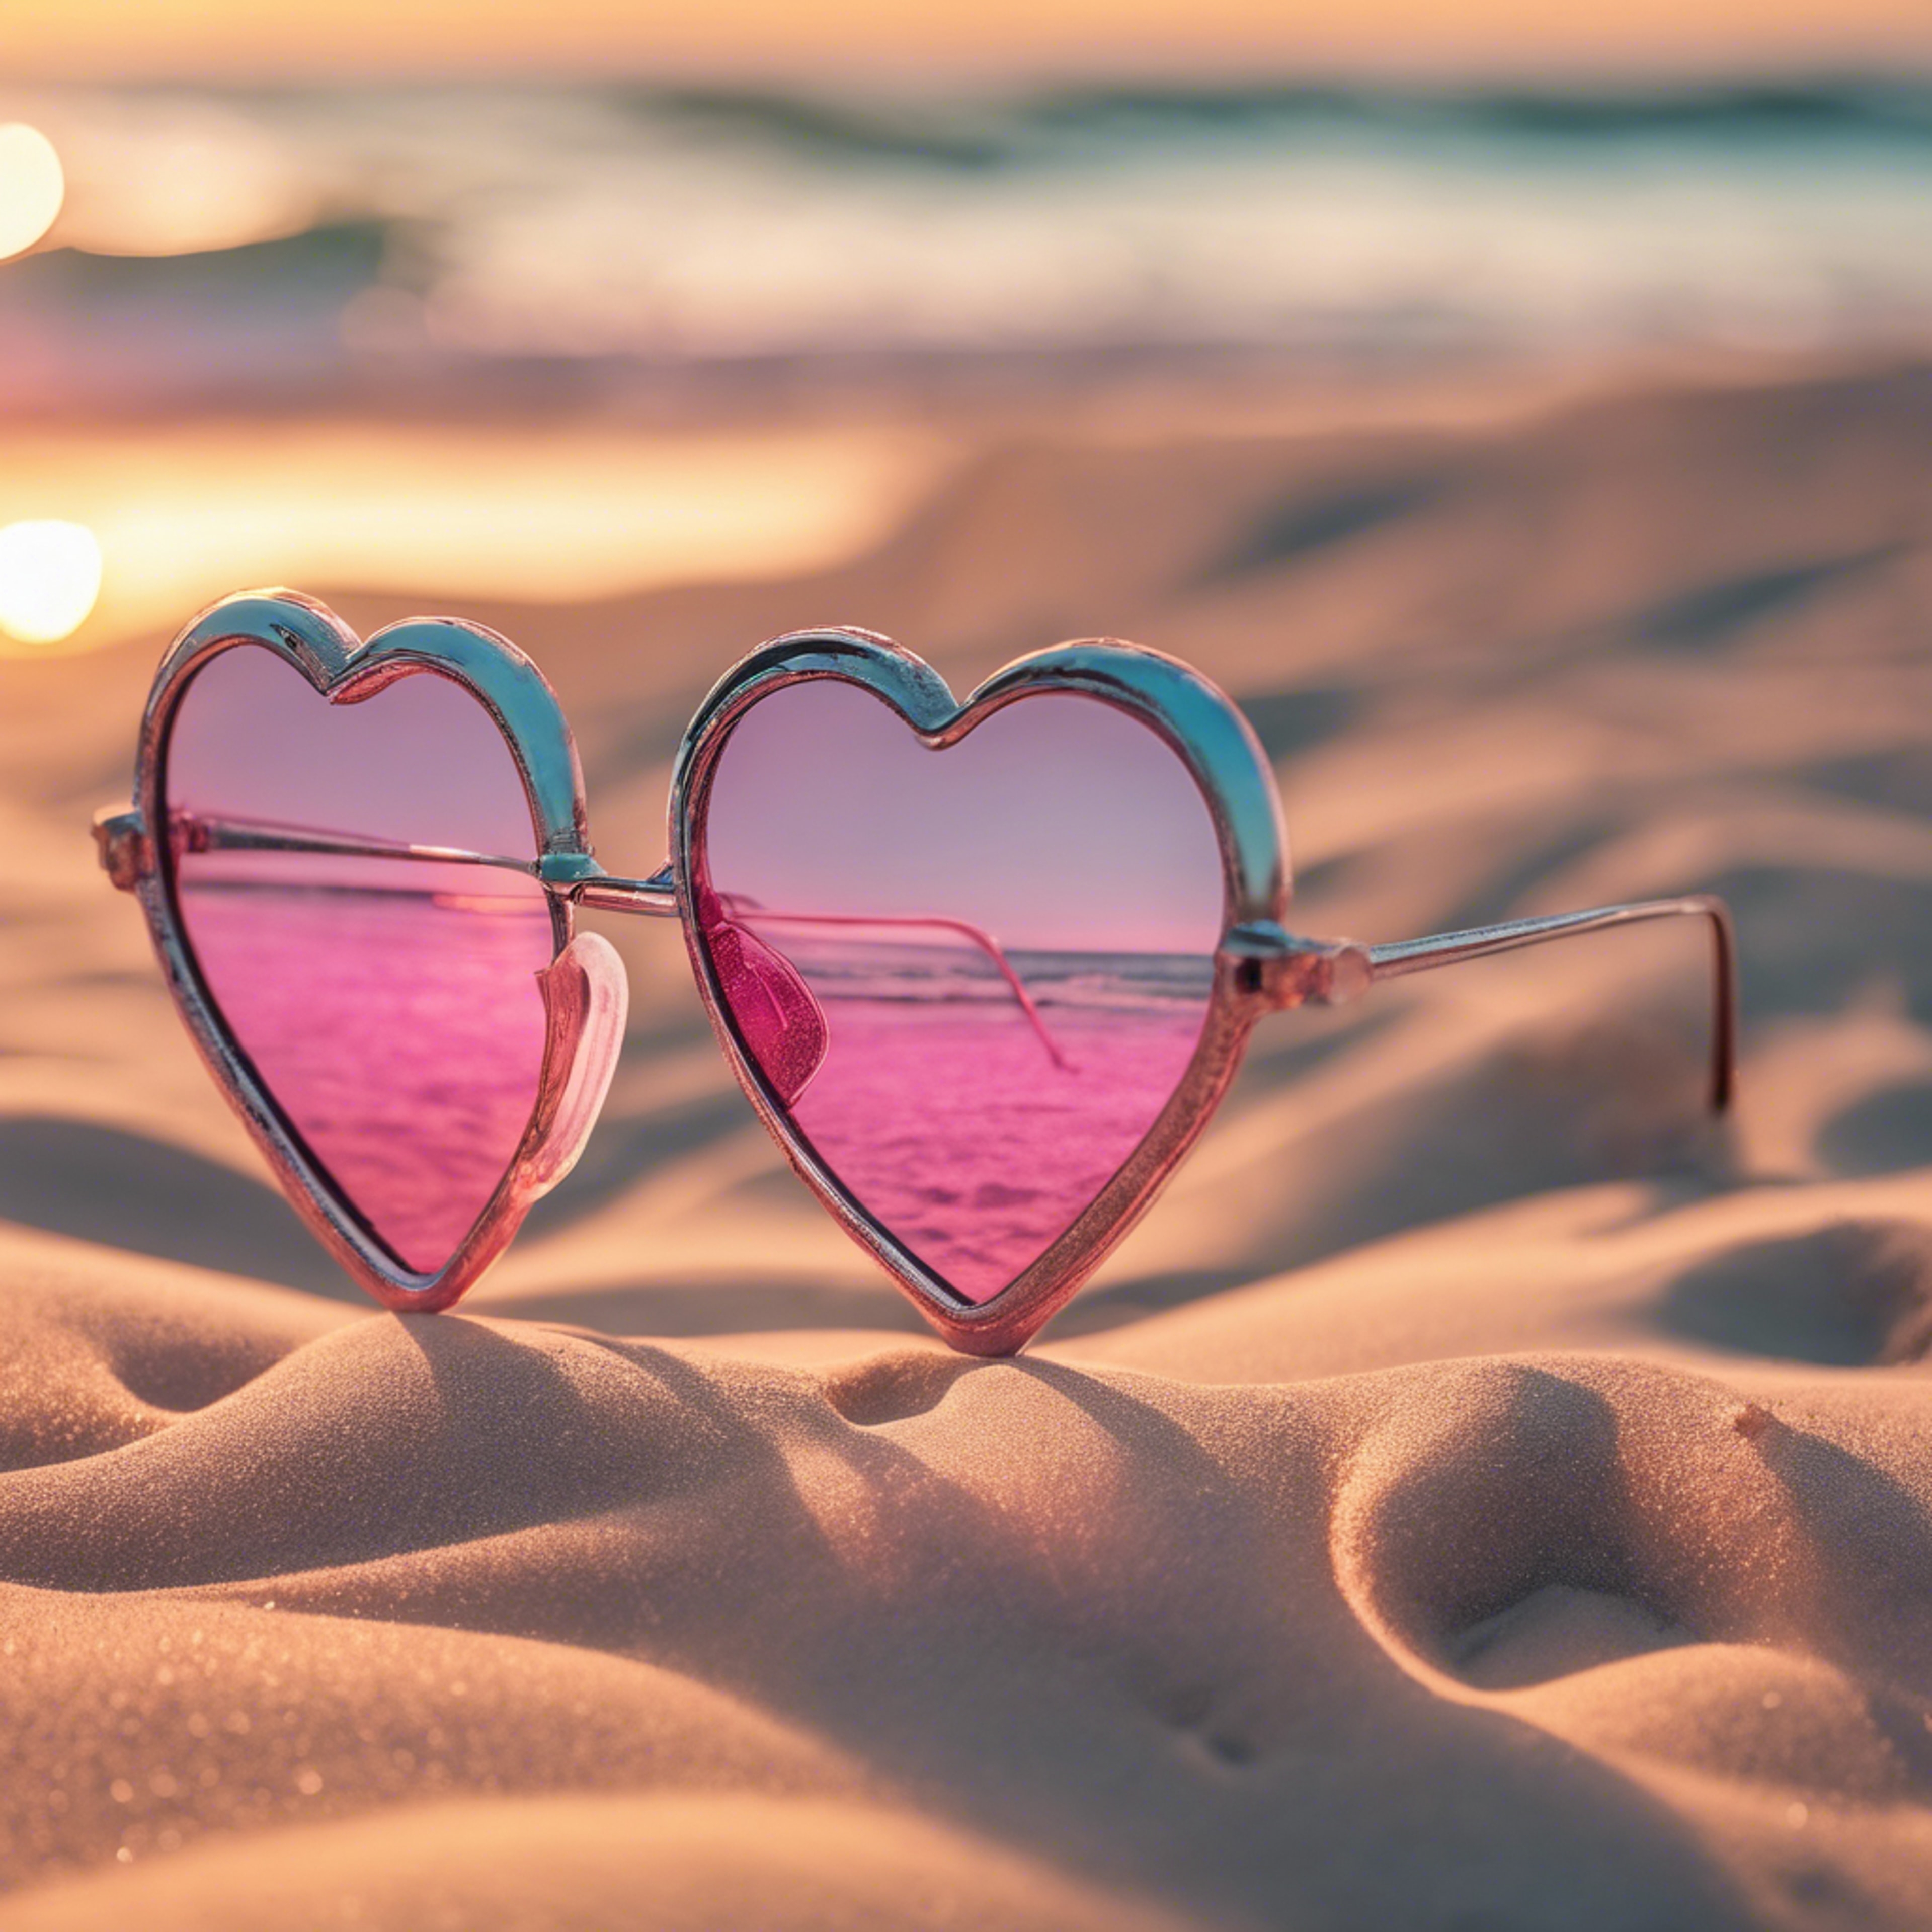 Pink heart-shaped eyeglasses reflecting the sunset at a sandy beach. Wallpaper[efe72a03955a4cafb74c]